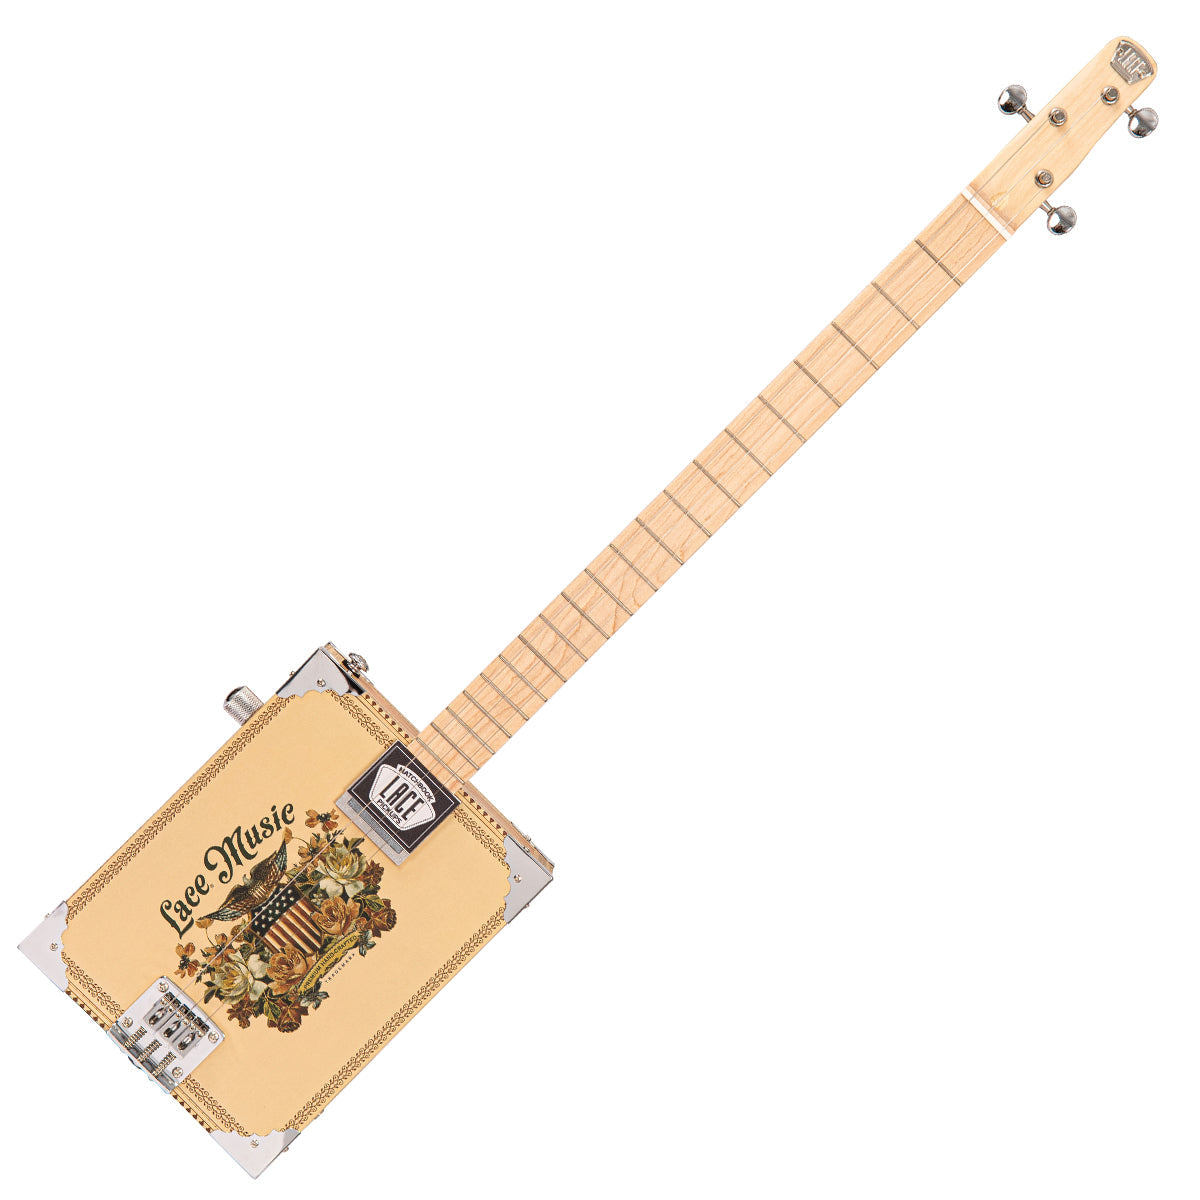 Lace Cigar Box Electric Guitar ~ 3 String ~ Americana, Electric Guitars for sale at Richards Guitars.